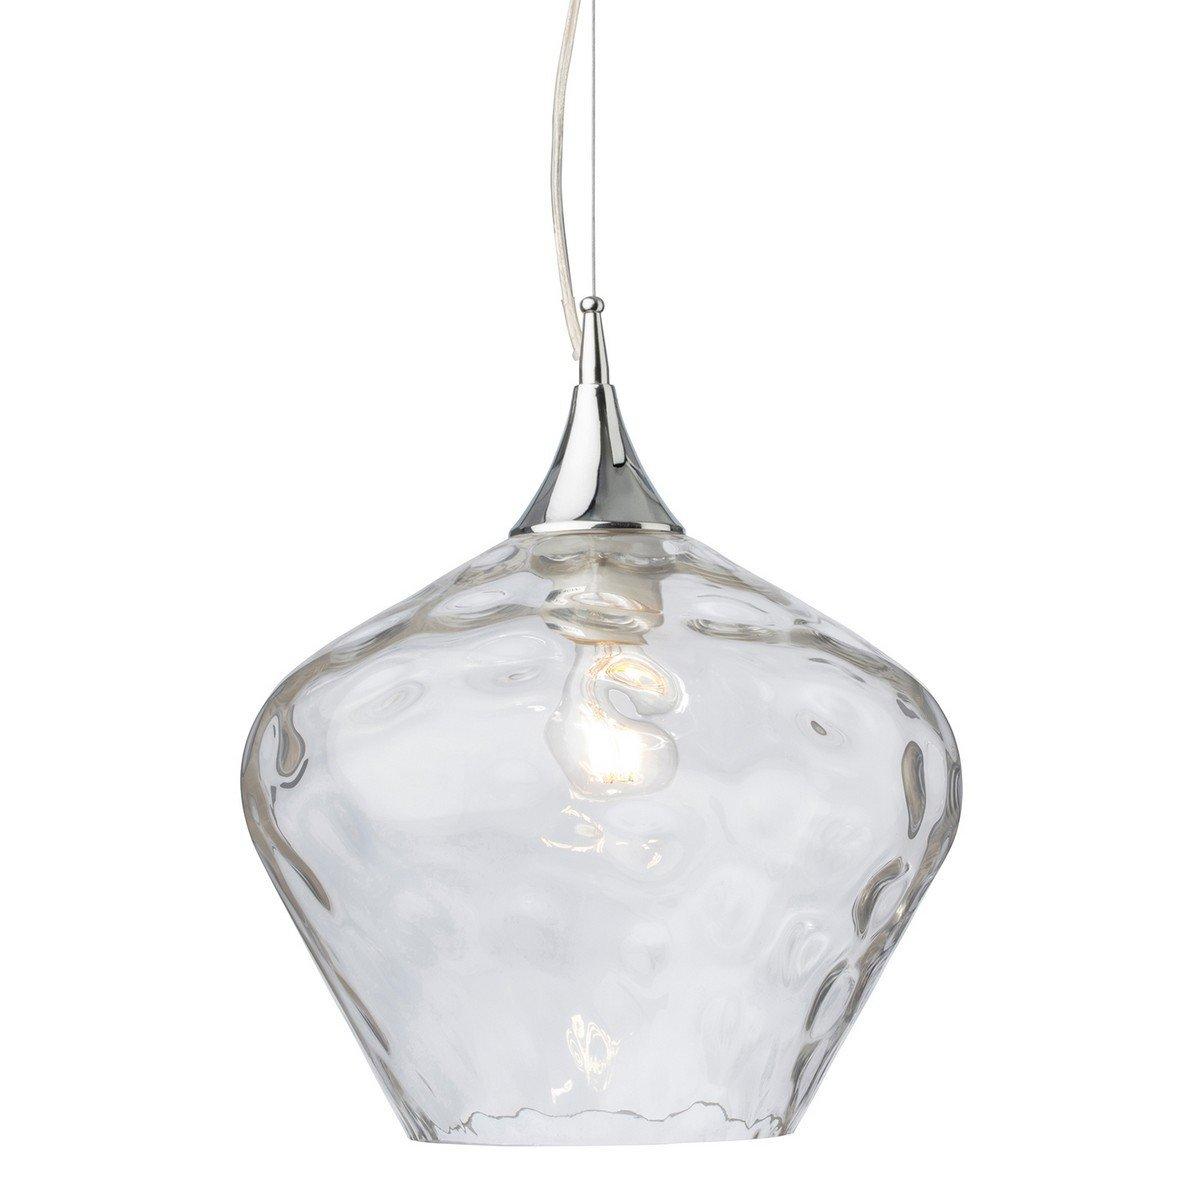 Titan Dome Pendant Light Chrome with Clear Glass